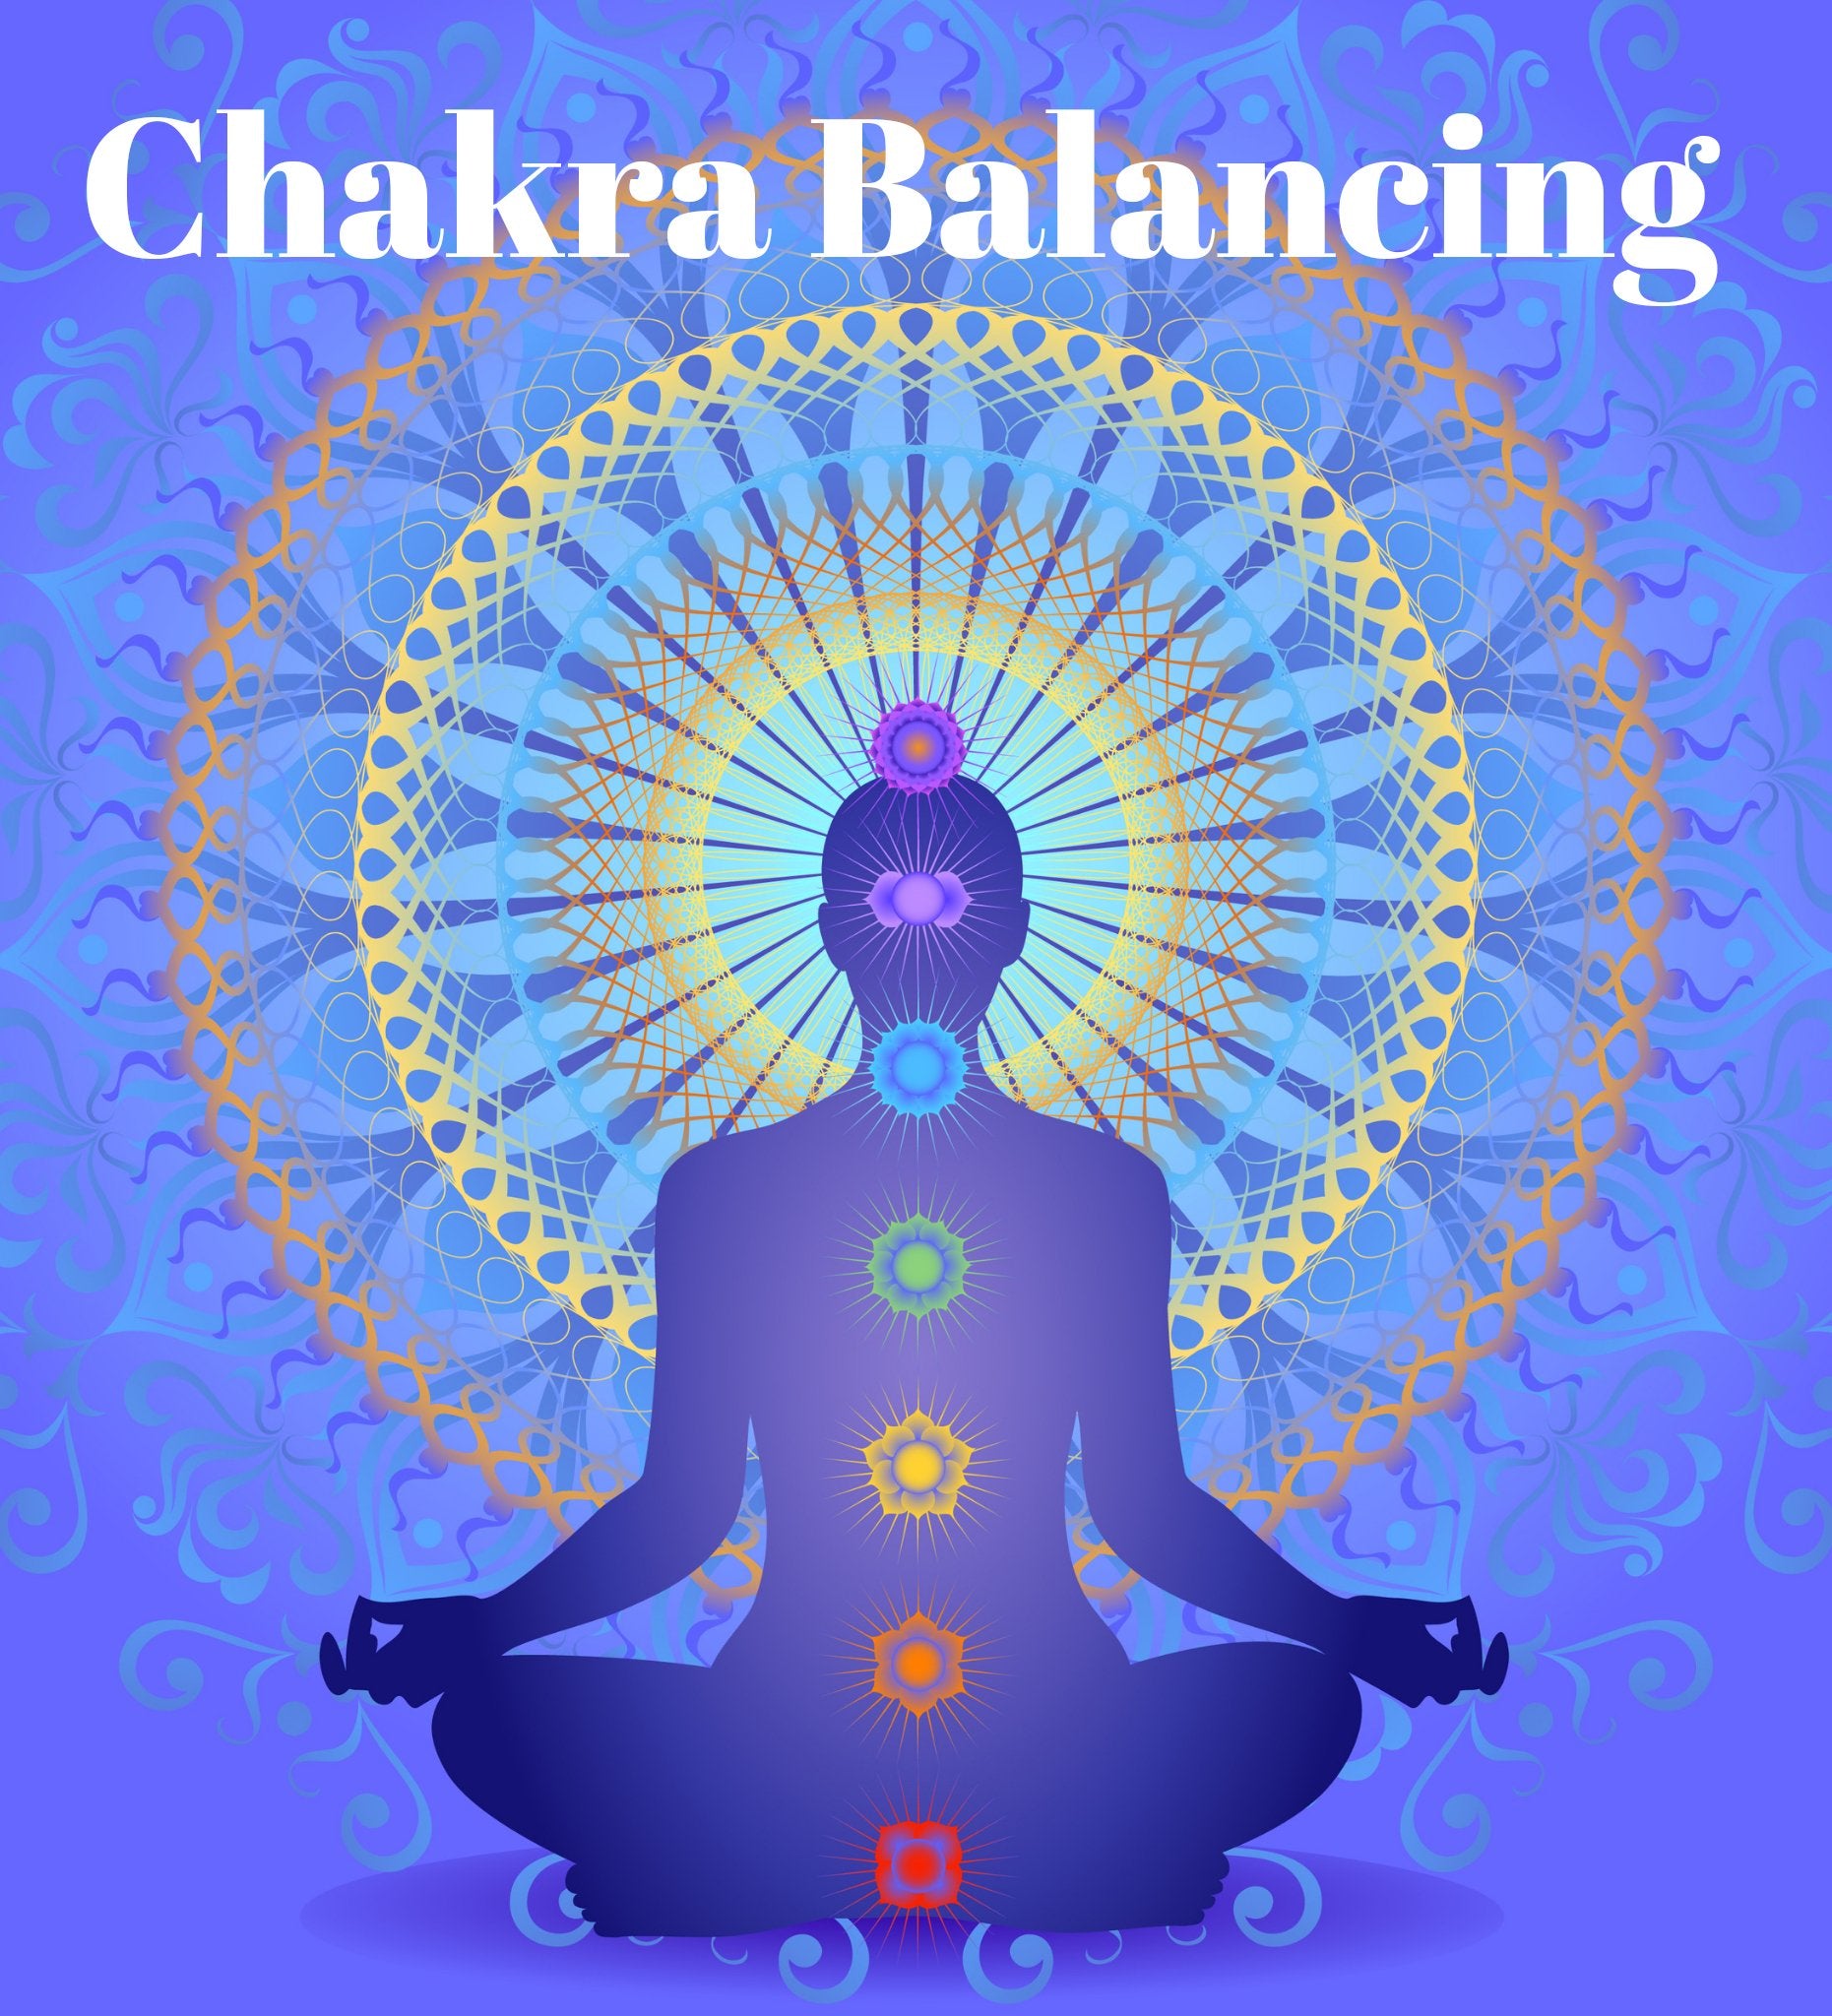 Chakra Balancing with Manisha Young - The Hare and the Moon